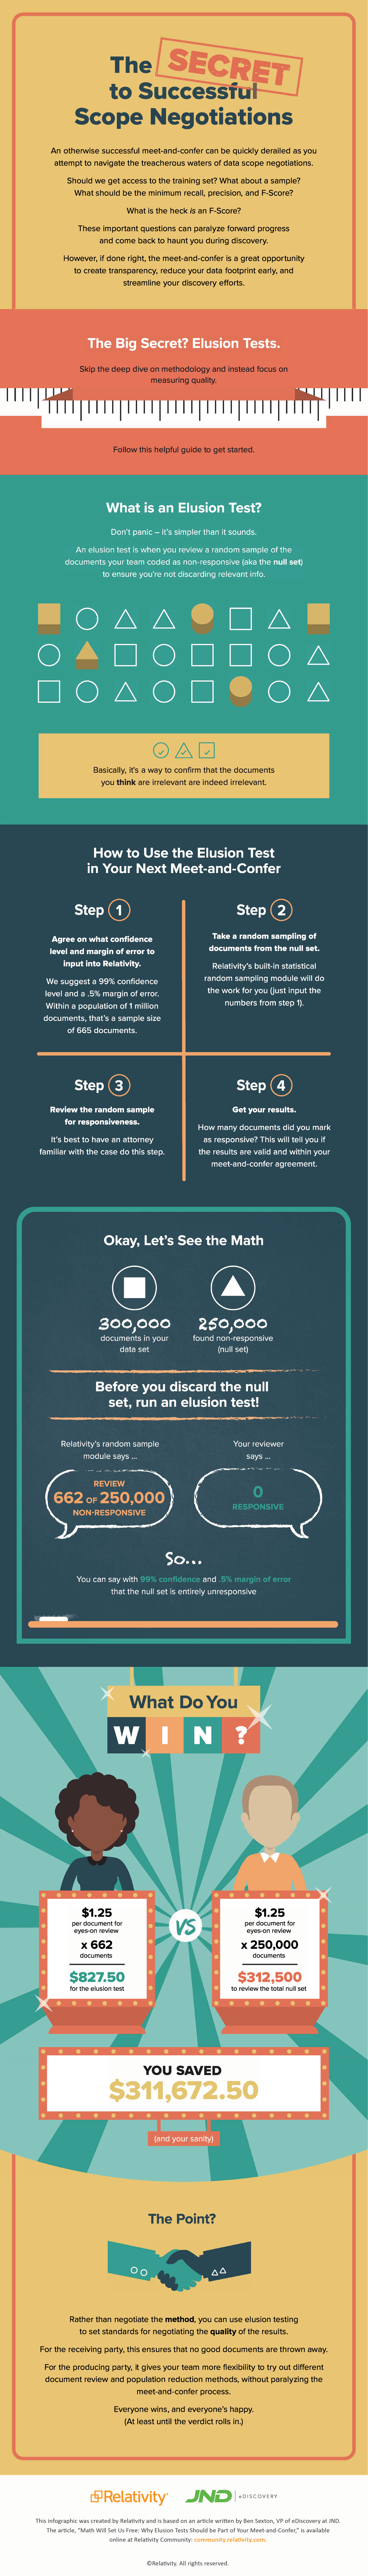 The Secret to Successful Scope Negotiations [Infographic] = Elusion Tests